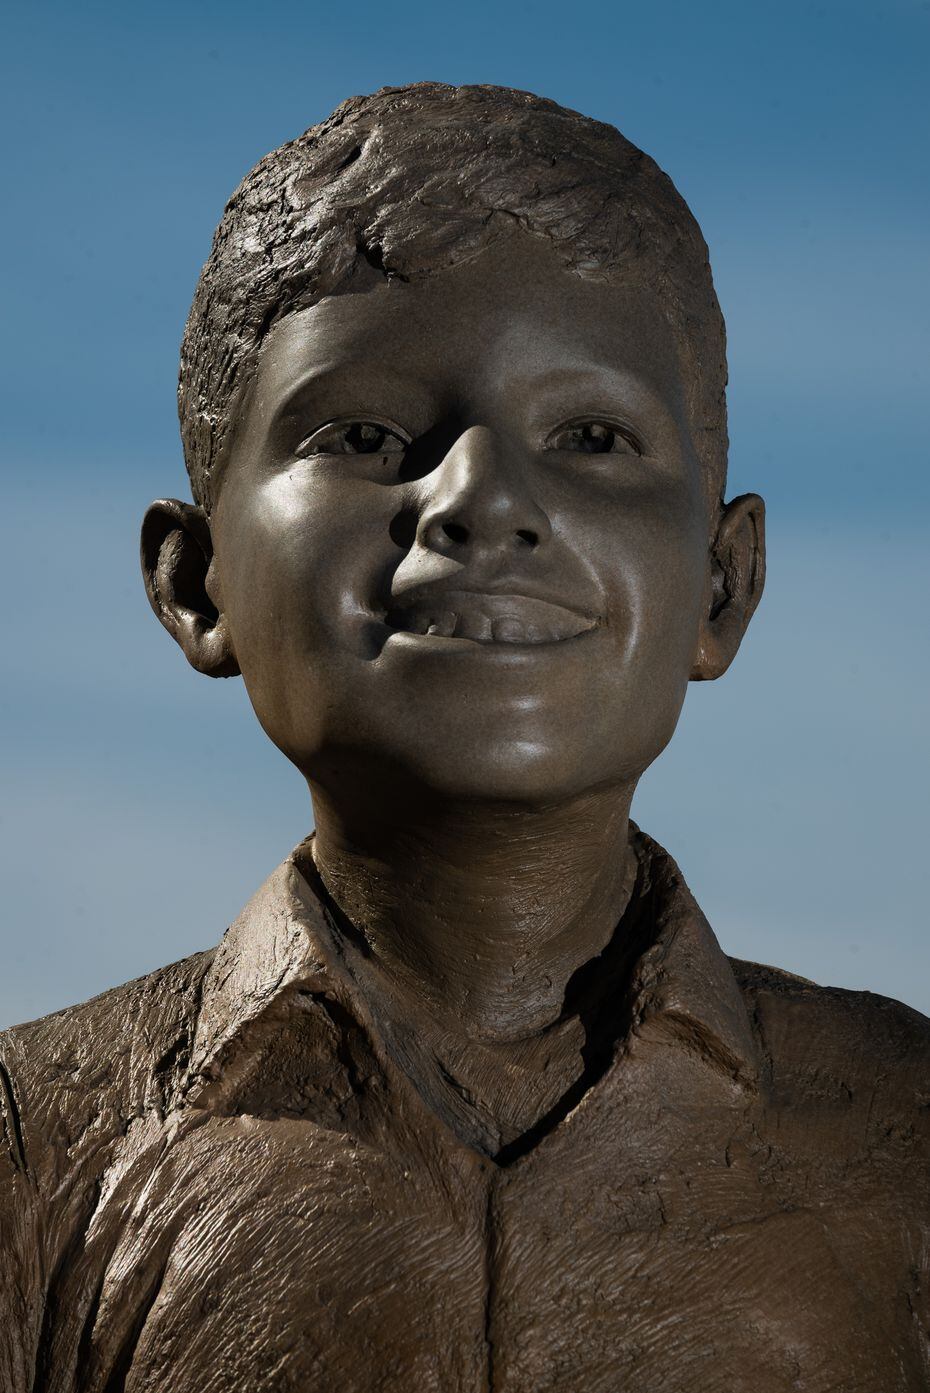 A detailed photo of a sculpture dedicated to the life and memory of 12-year-old Santos...